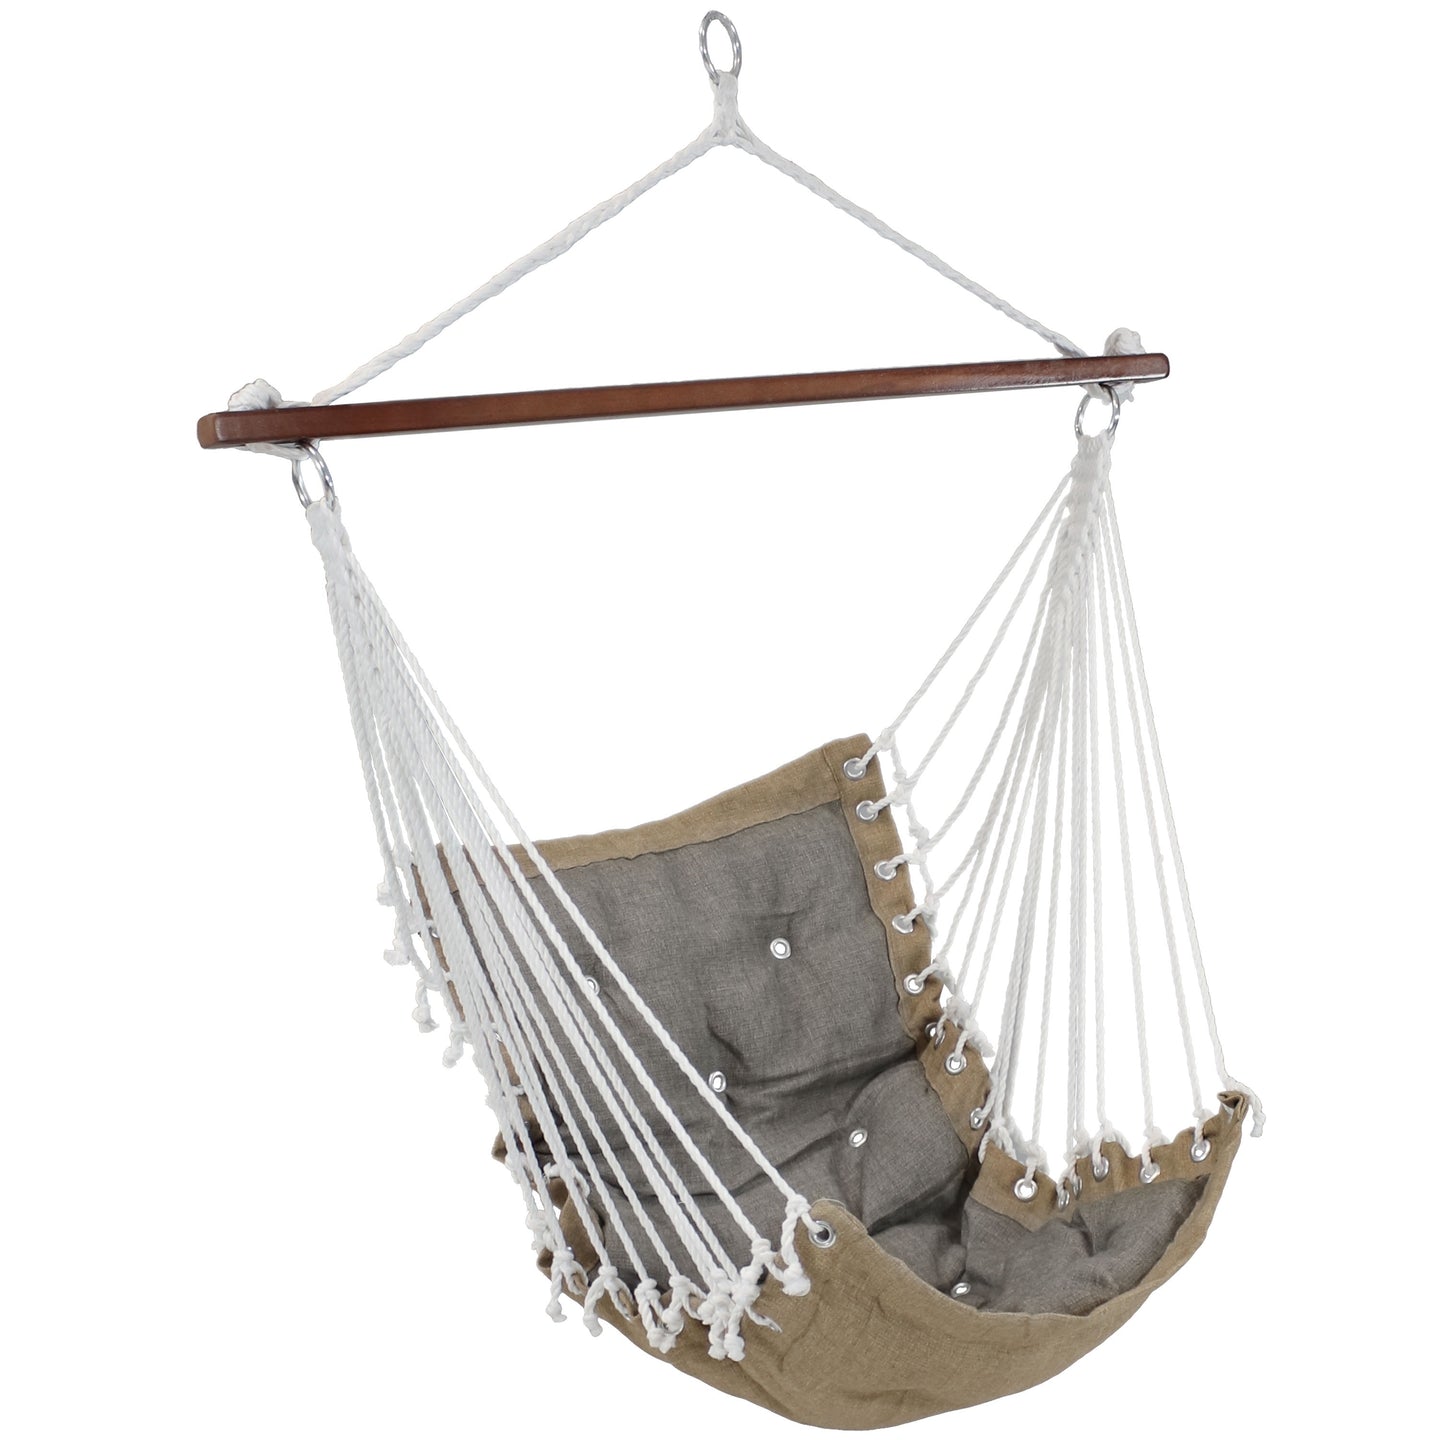 Cade Tufted Swing Chair #221-NT